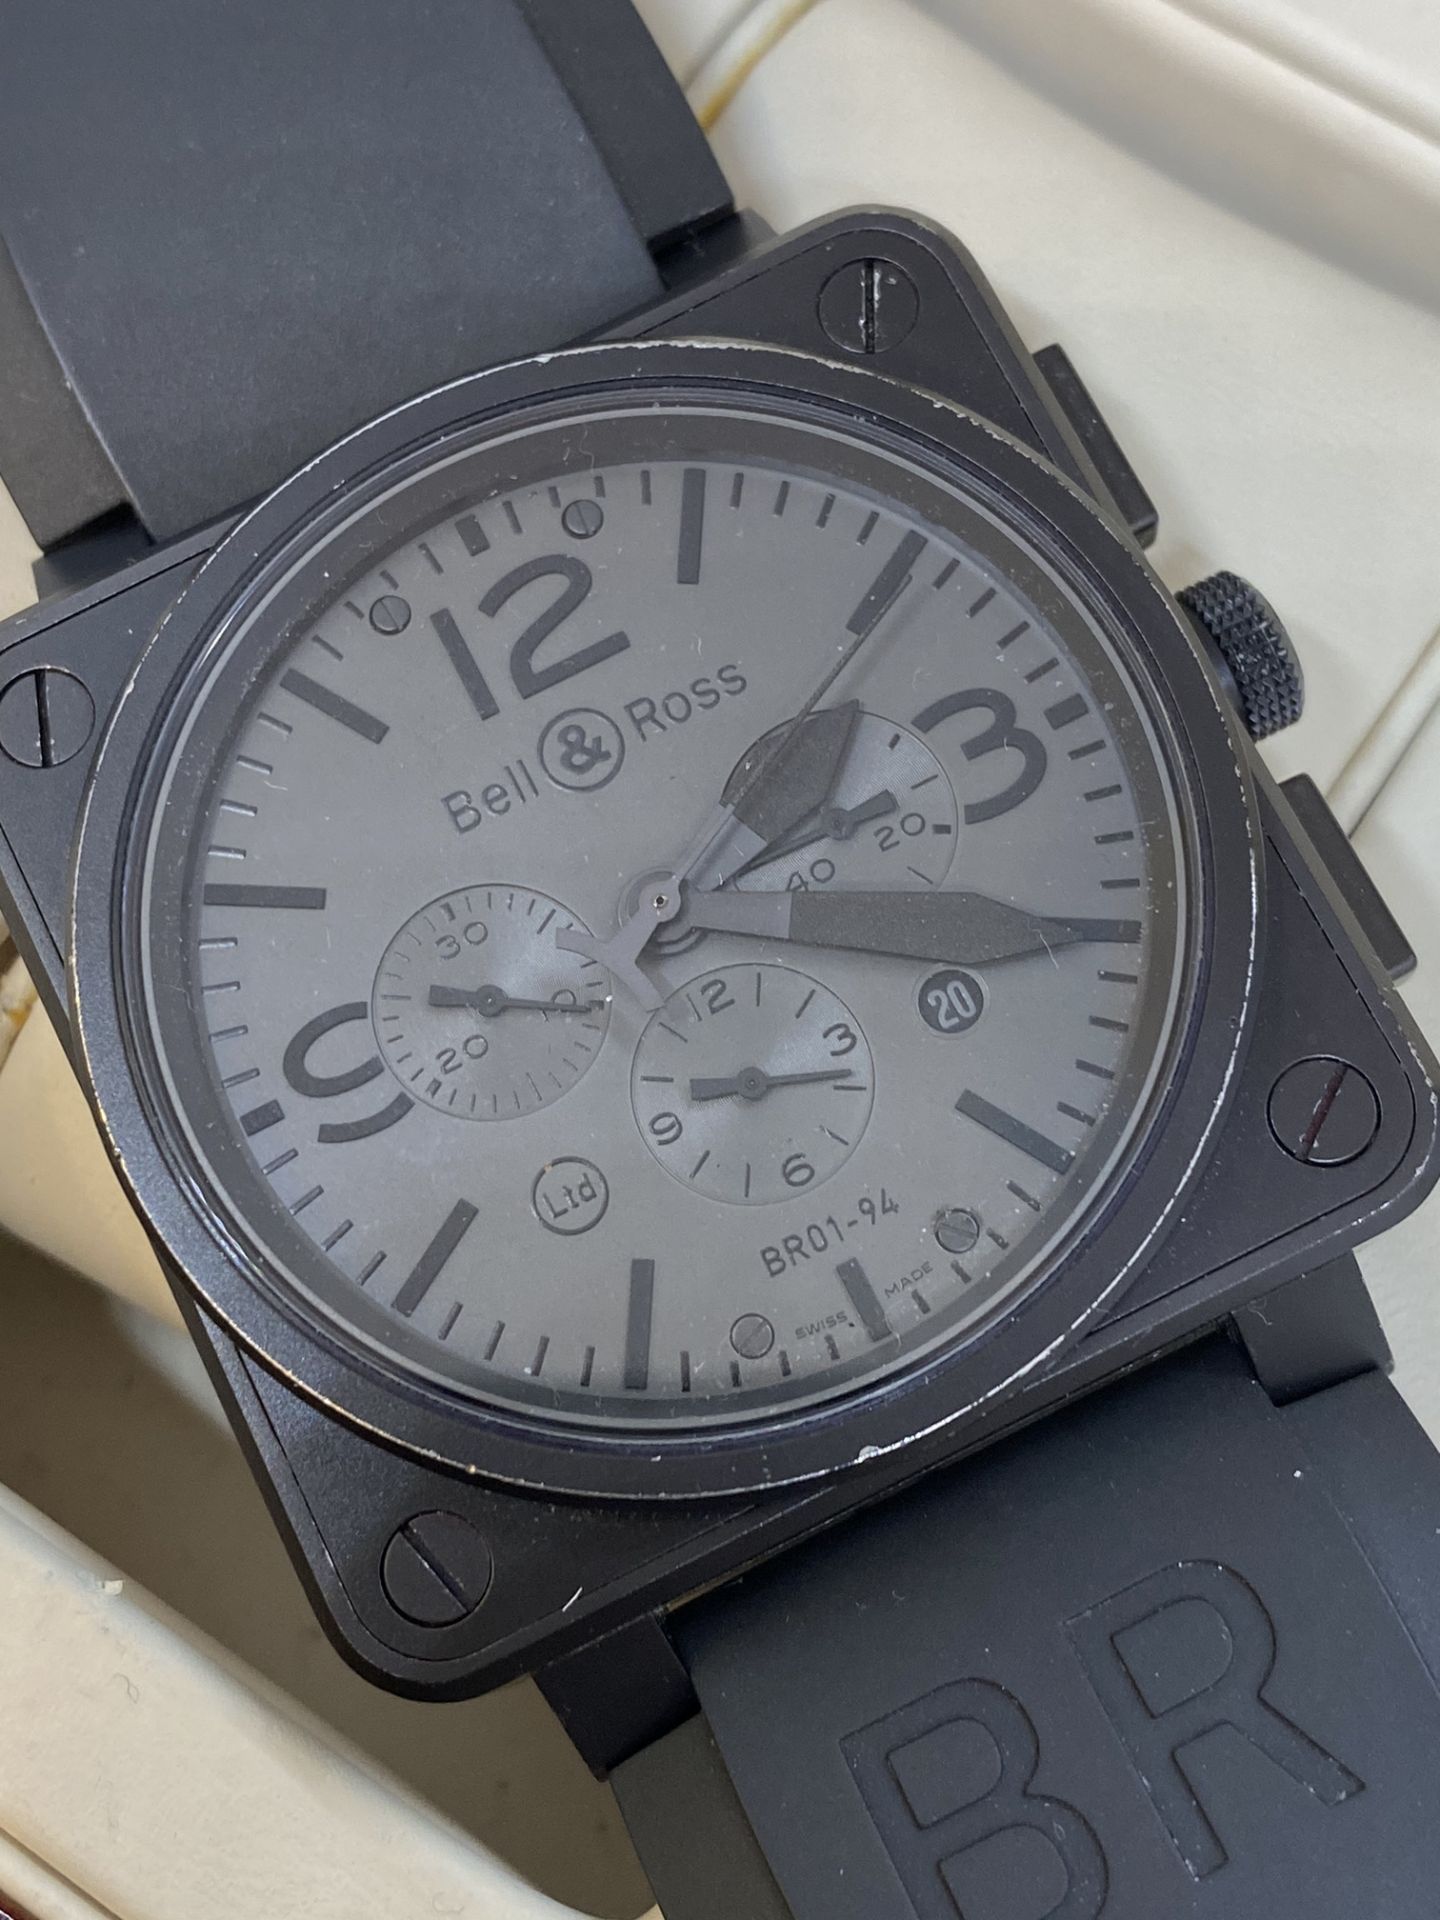 BELL & ROSS BRO1-94 LIMITED EDITION WATCH - Image 4 of 10